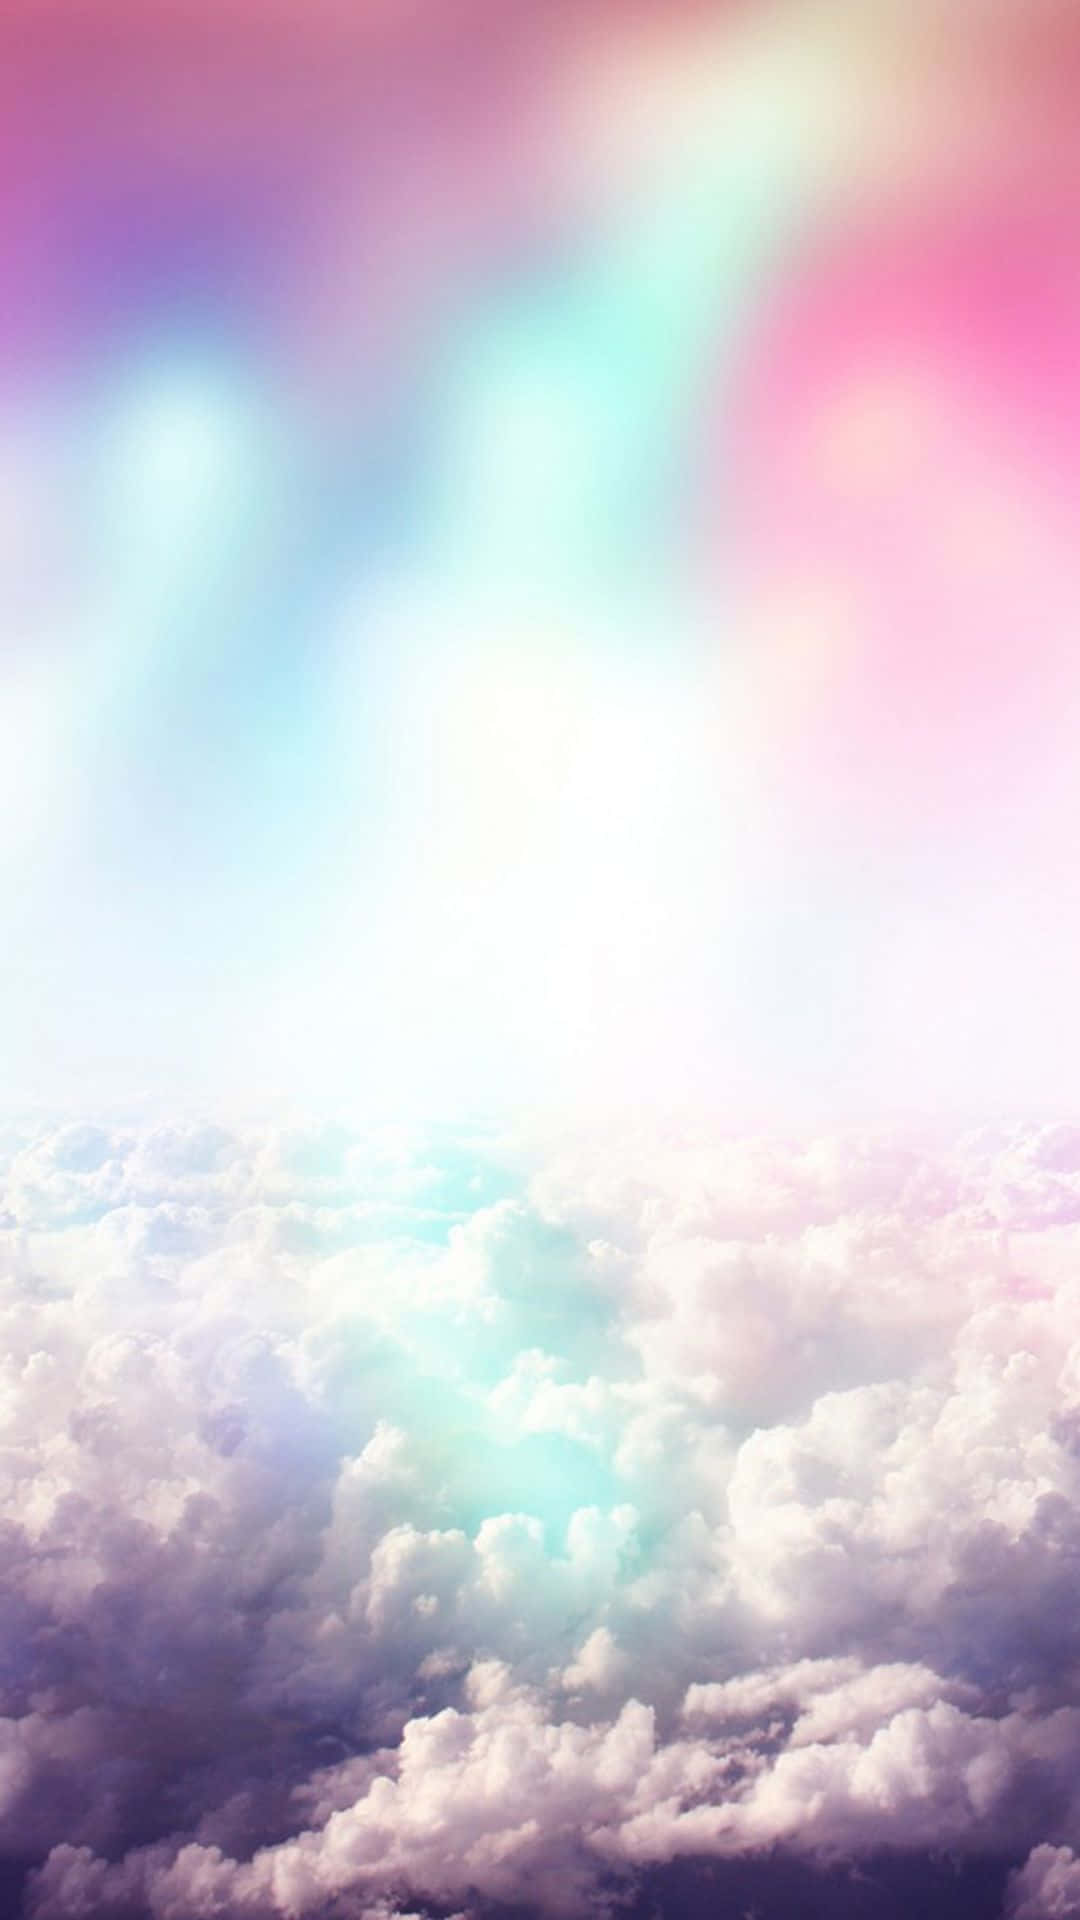 Image A Cheerful Rainbow Against A Sky Of Soft Clouds. Background